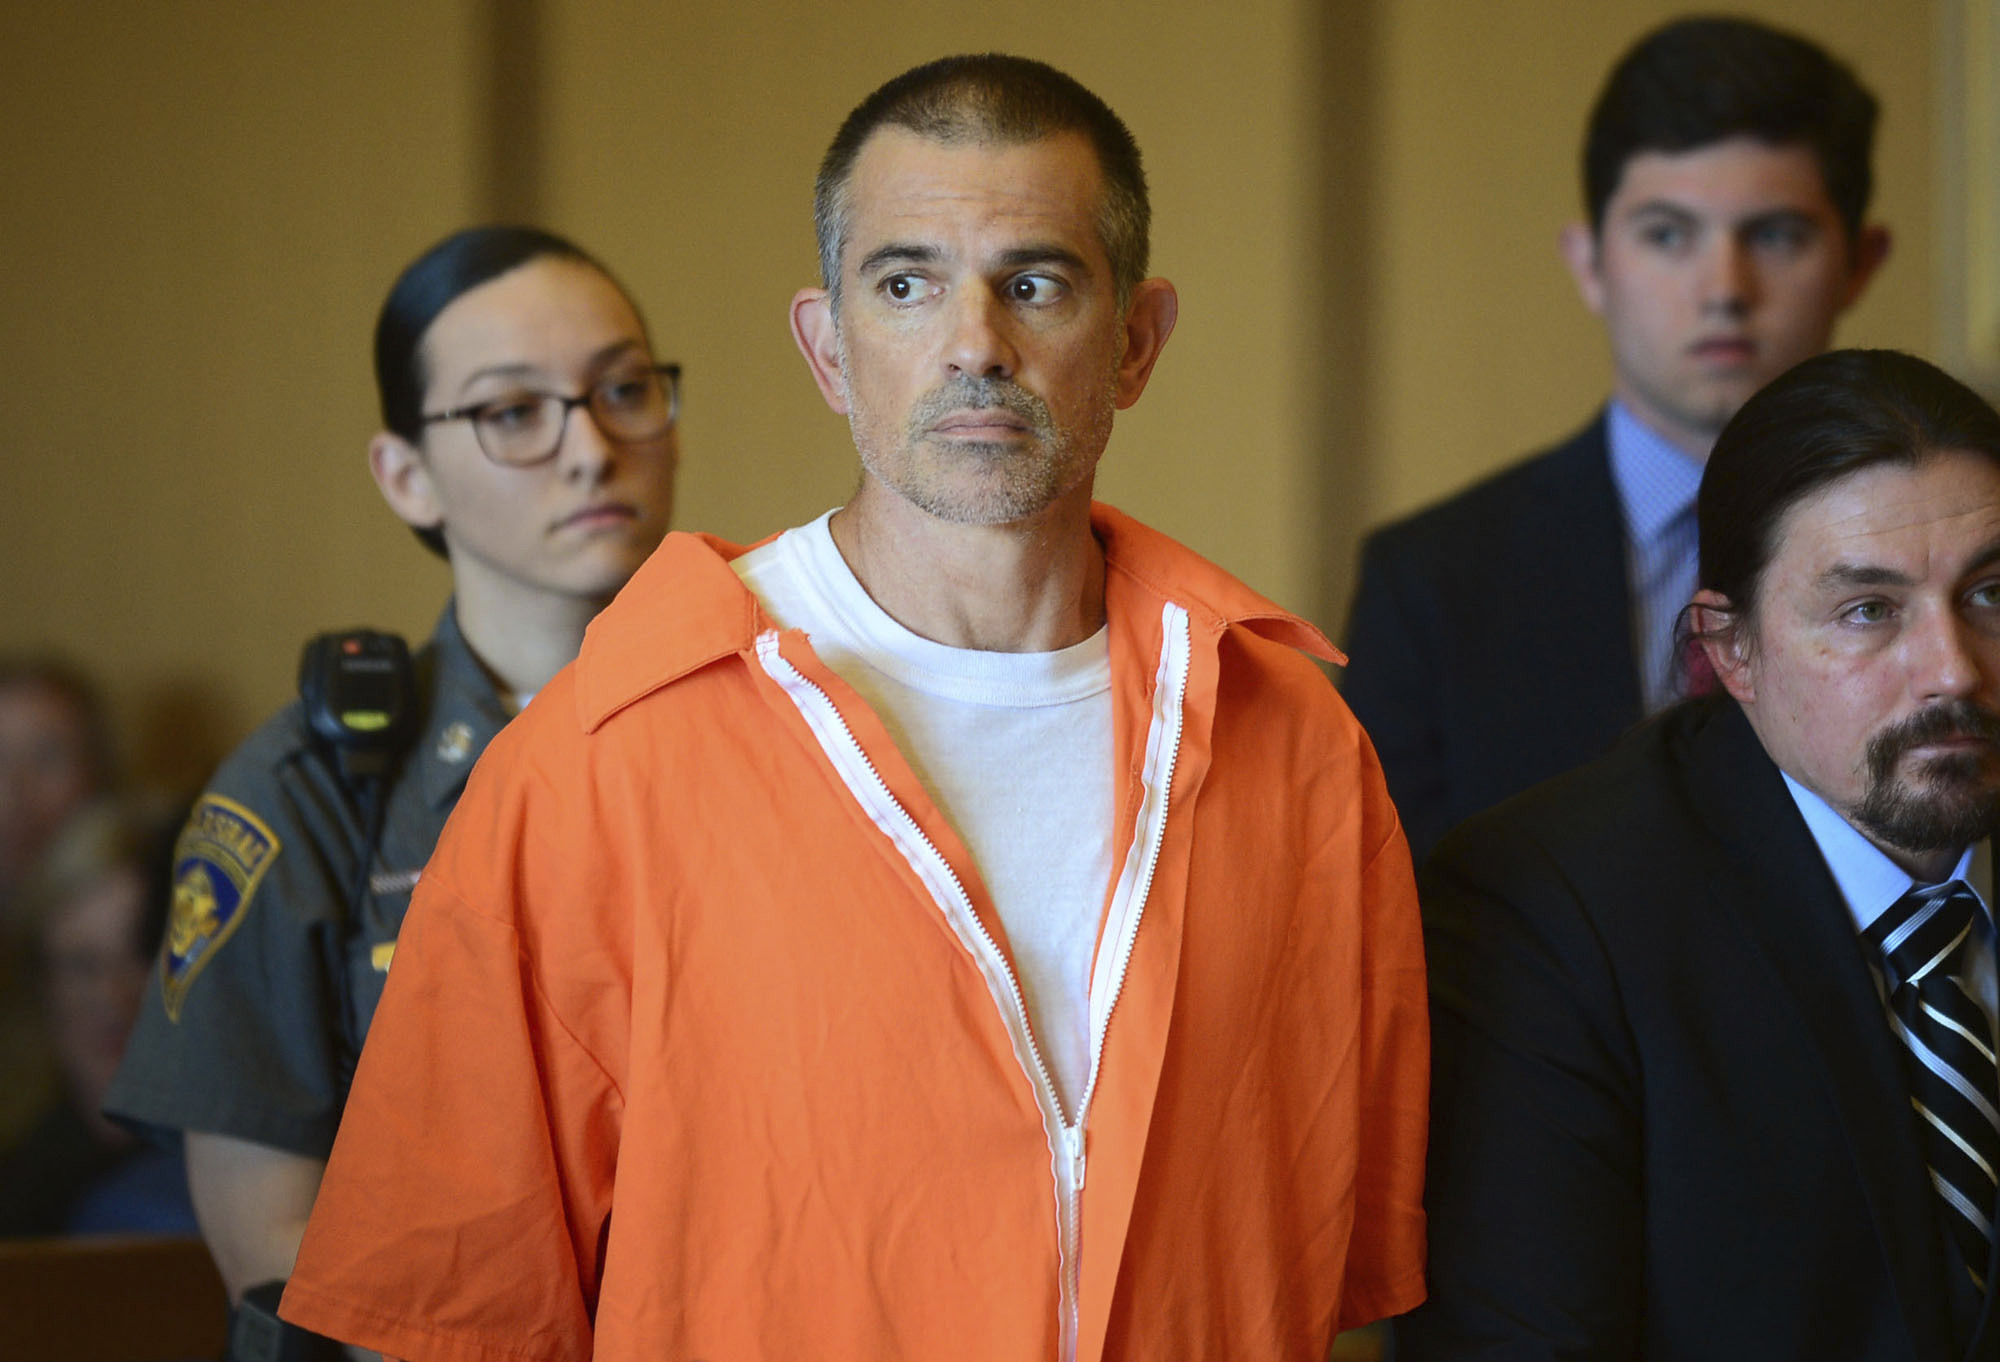 PHOTO:Fotis Dulos stands during a hearing at Stamford Superior Court, June 11, 2019 in Stamford, Conn.